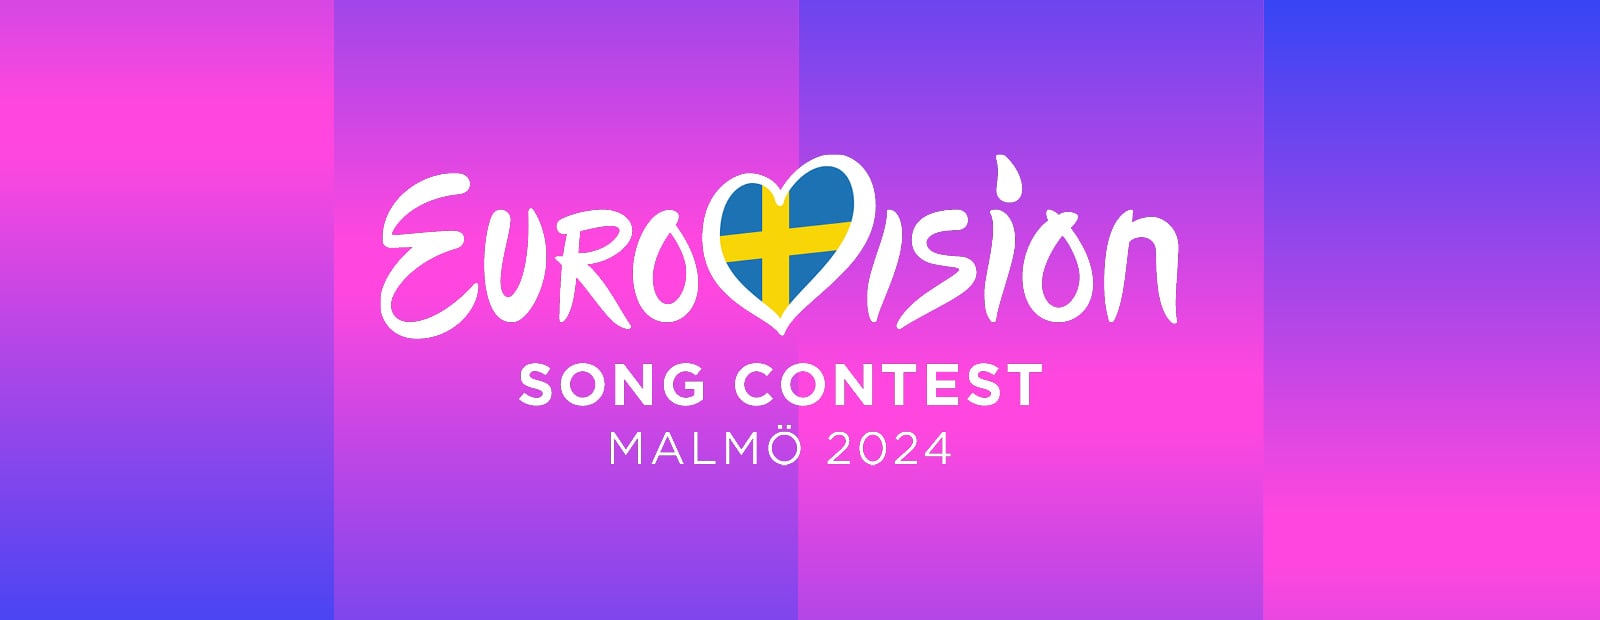 Eurovision Song Contest 2024 Semifinal 1 - Afternoon Preview